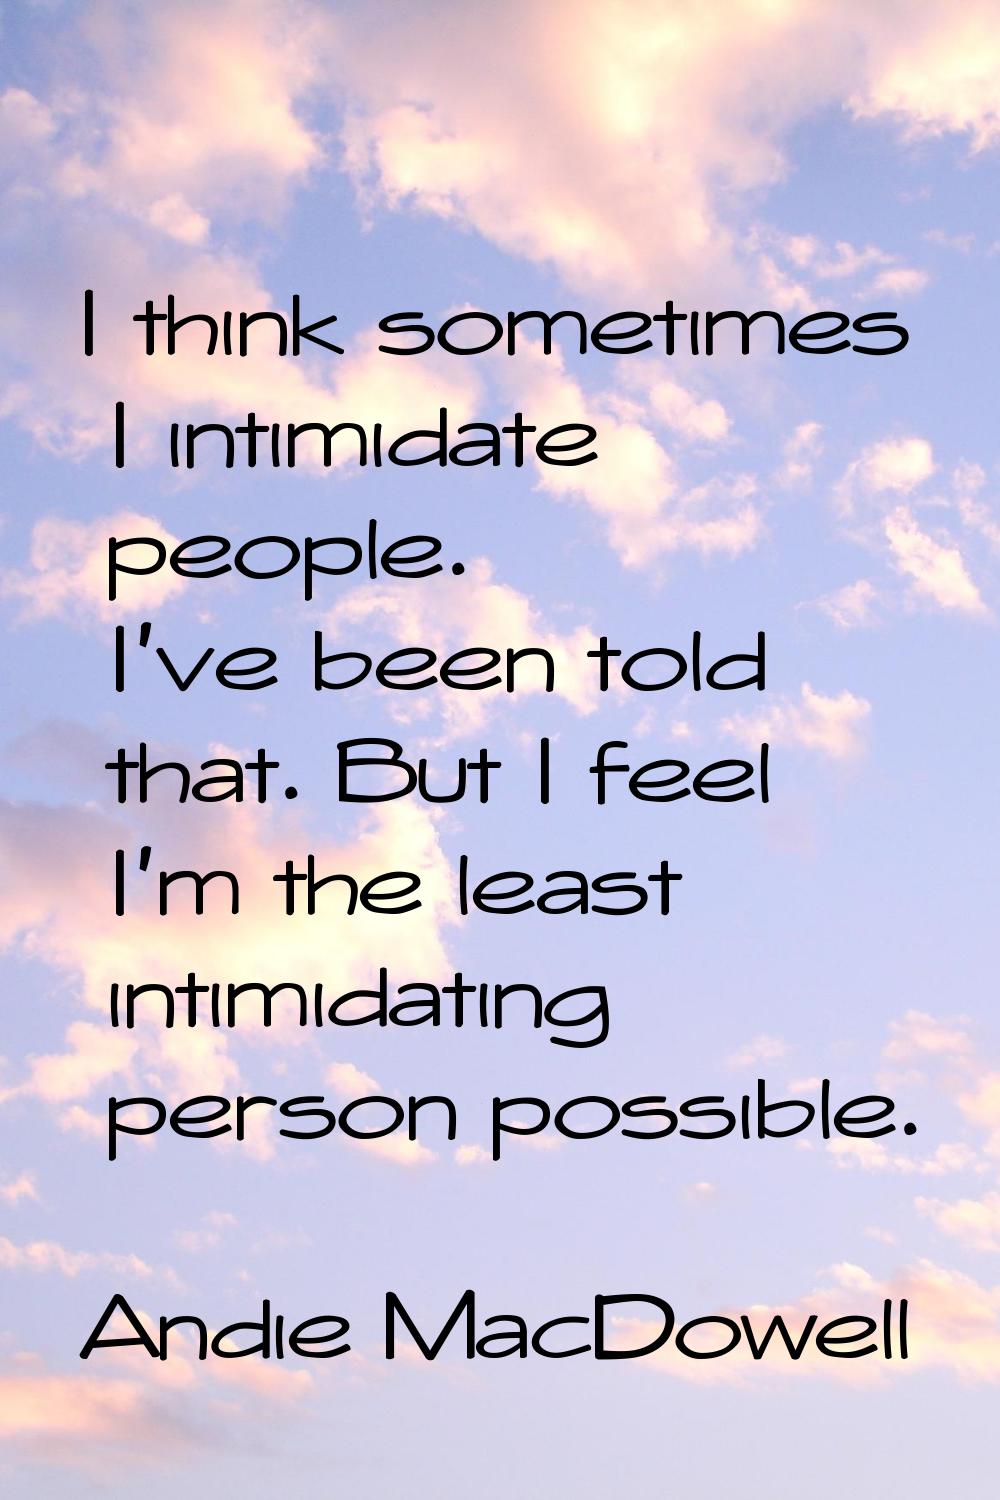 I think sometimes I intimidate people. I've been told that. But I feel I'm the least intimidating p